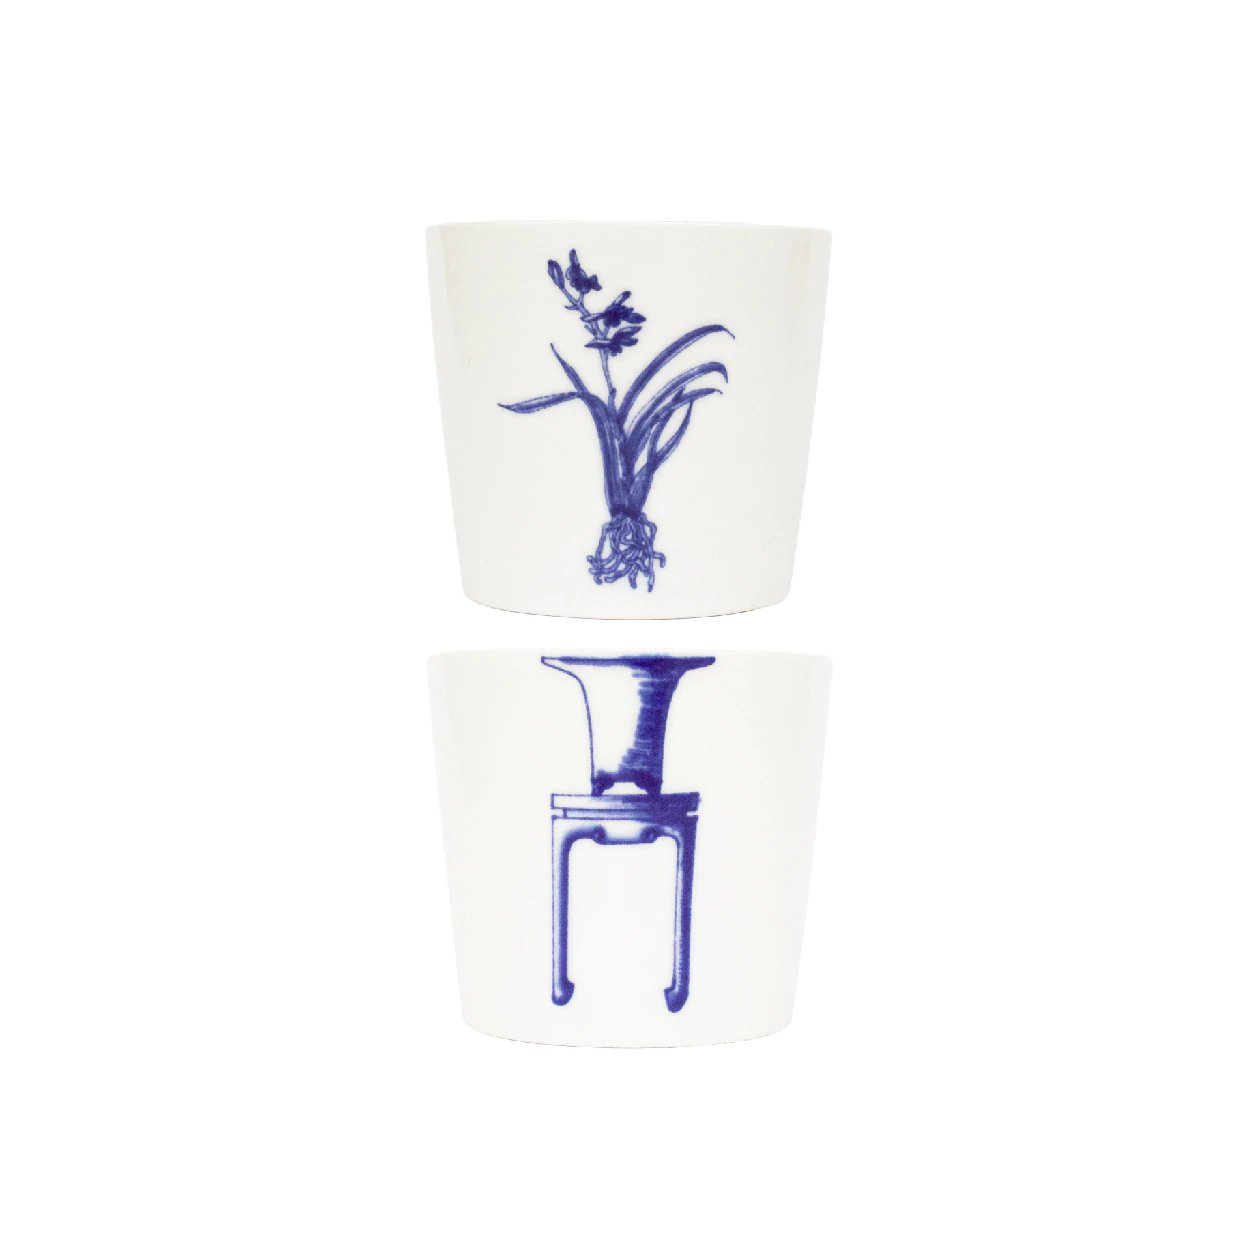 Bonsai Cups - Orchid design, showing two cups separated.